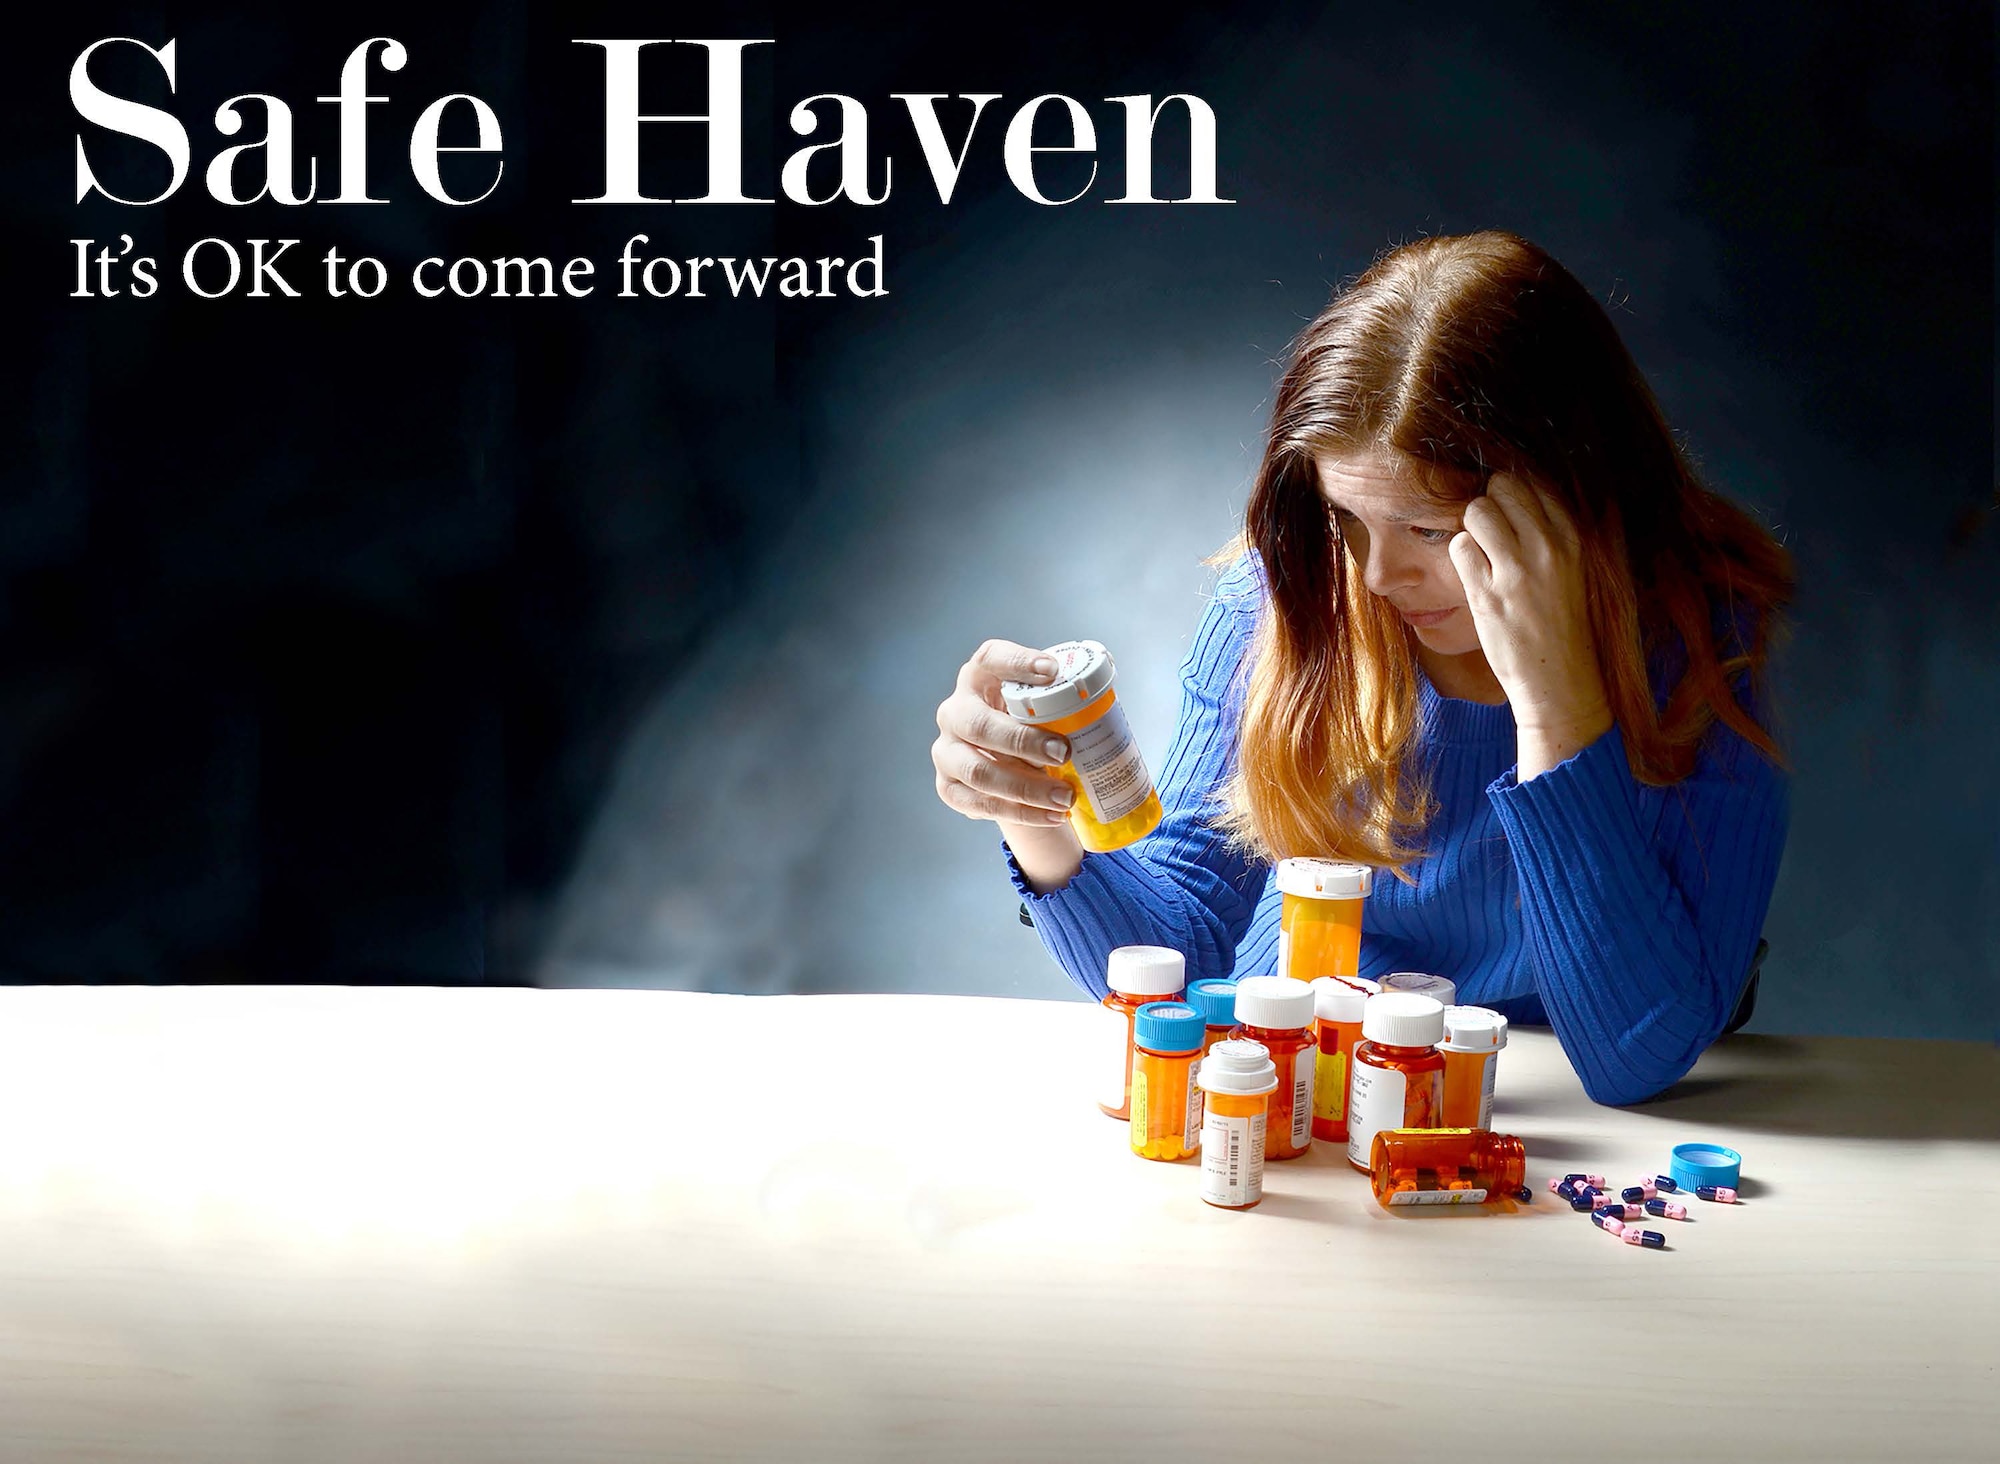 To best represent the struggles that go along with substance abuse problems, Robins Public Affairs photographer Tommie Horton asked Angela Woolen, Rev-Up reporter, to model for the photo illustration used on the front page of the base newspaper. Although prescription drugs were used for the illustration, all substance abuse problems are serious, and help is available. (U.S. Air Force photo illustration by Tommie Horton)
